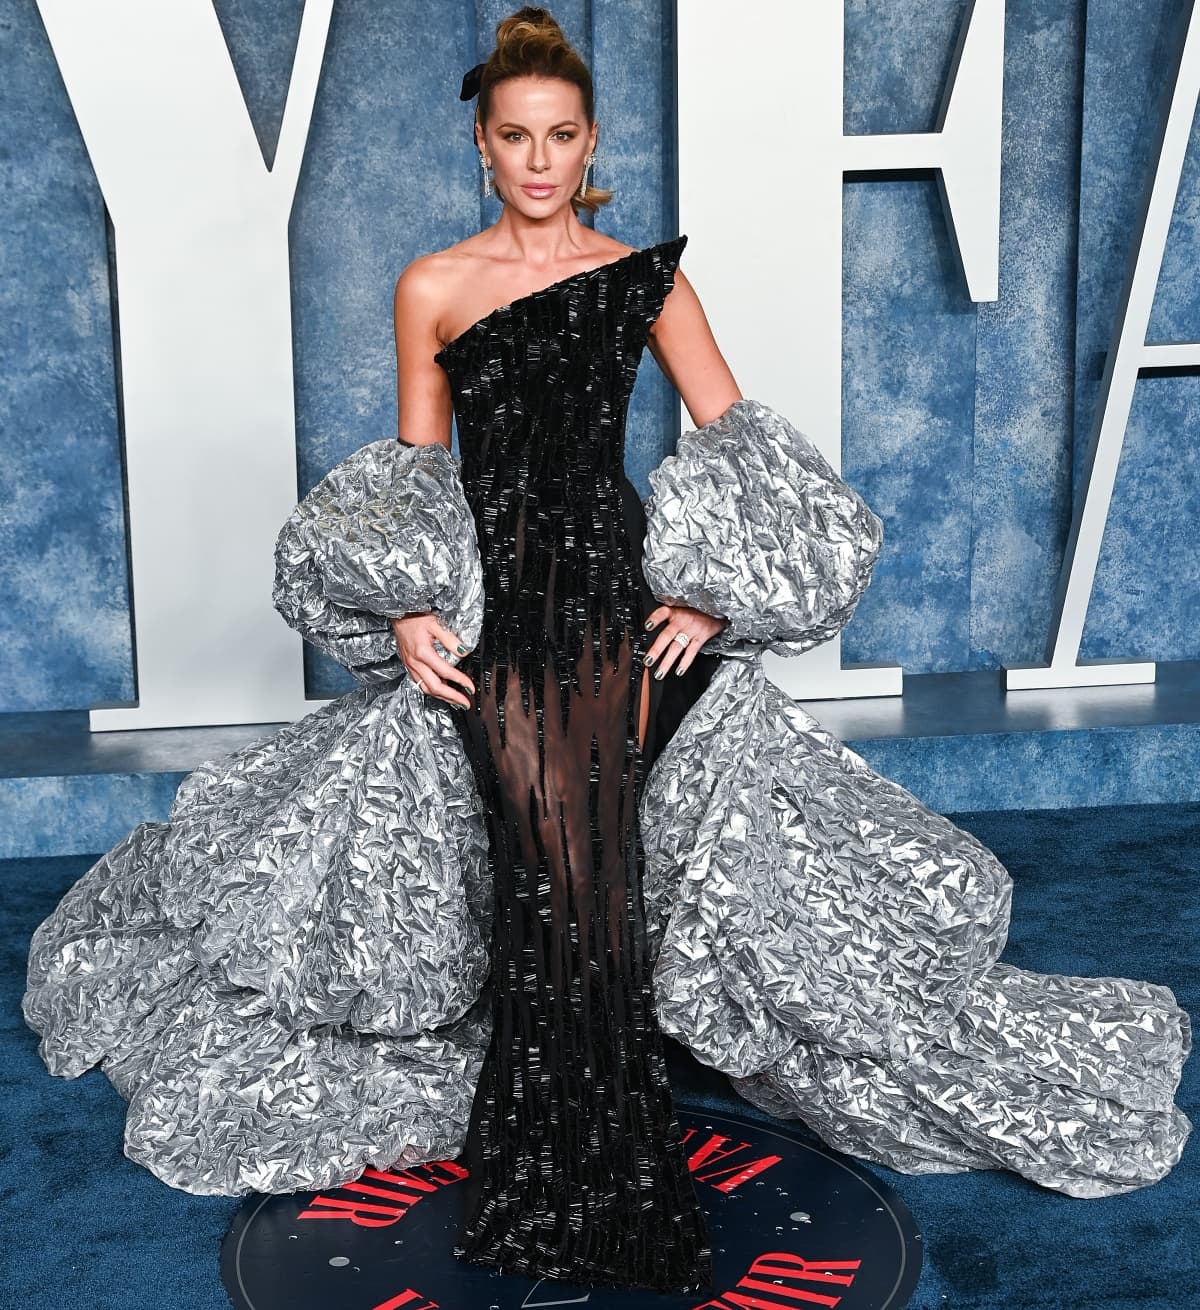 Kate Beckinsale made a show-stopping entrance at the 2023 Vanity Fair Oscar Party